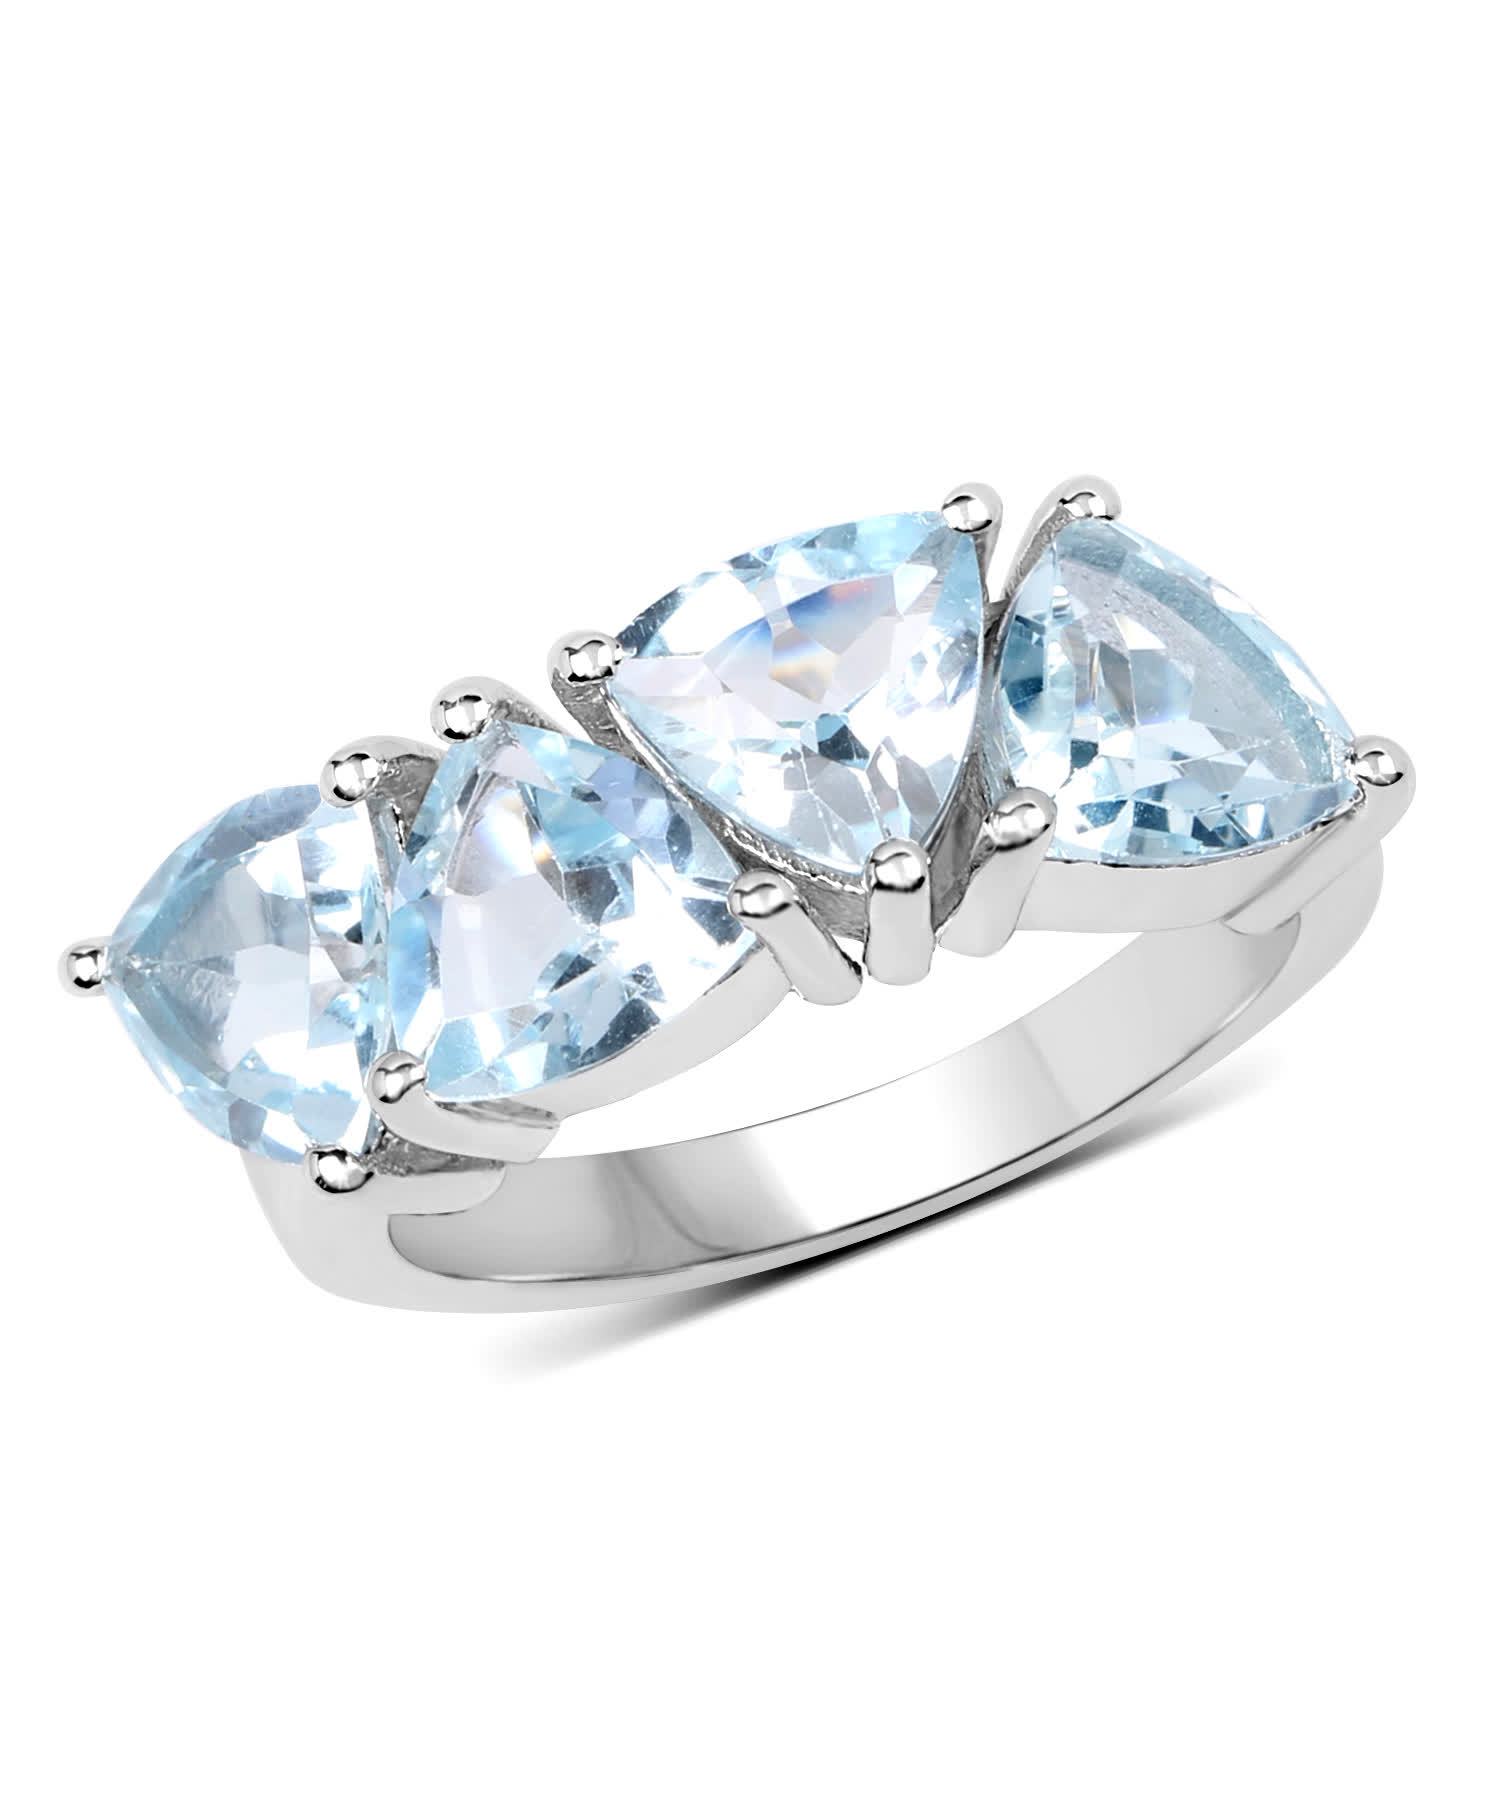 5.00ctw Natural Sky Blue Topaz Rhodium Plated 925 Sterling Silver Right Hand Ring View 1